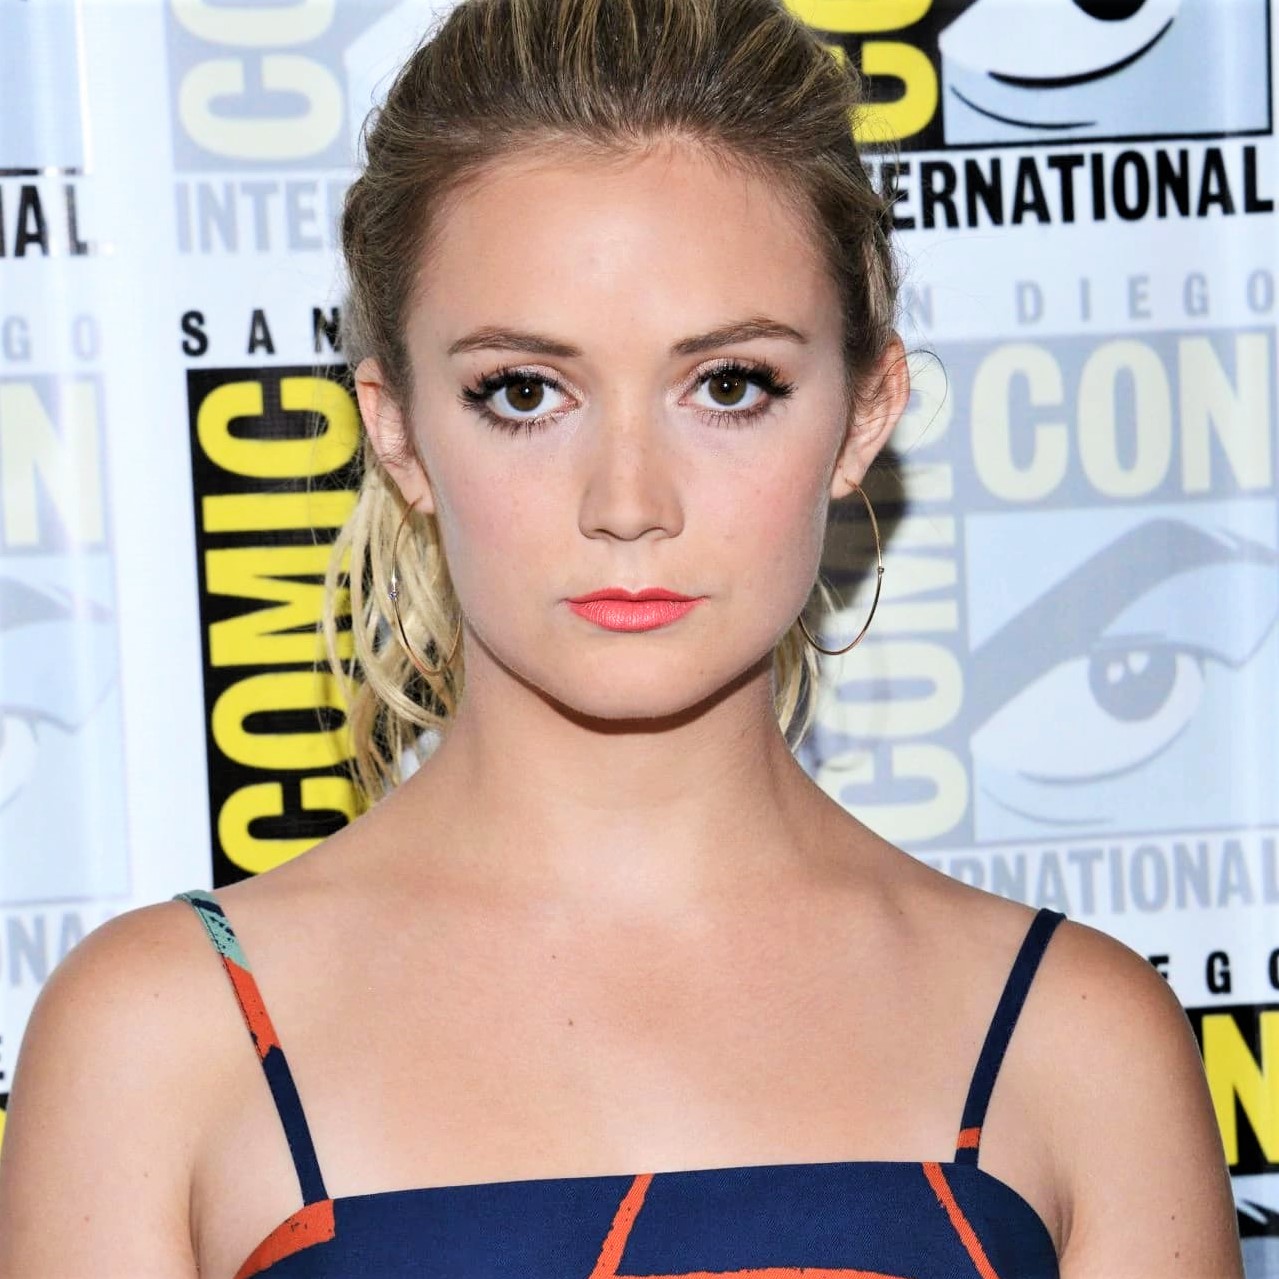 Actresses, American Actresses, American Celebrities, Beautiful American Celebrities, Billie Lourd age, Billie Lourd Body Statistics, Billie Lourd height, Billie Lourd Measurements, Billie Lourd weight, Cancer Actresses, Cancer Celebrities, Hottest American Celebrities, Hottest American Girls, Hottest American Women, Zodiac Actresses, Zodiac Celebrities